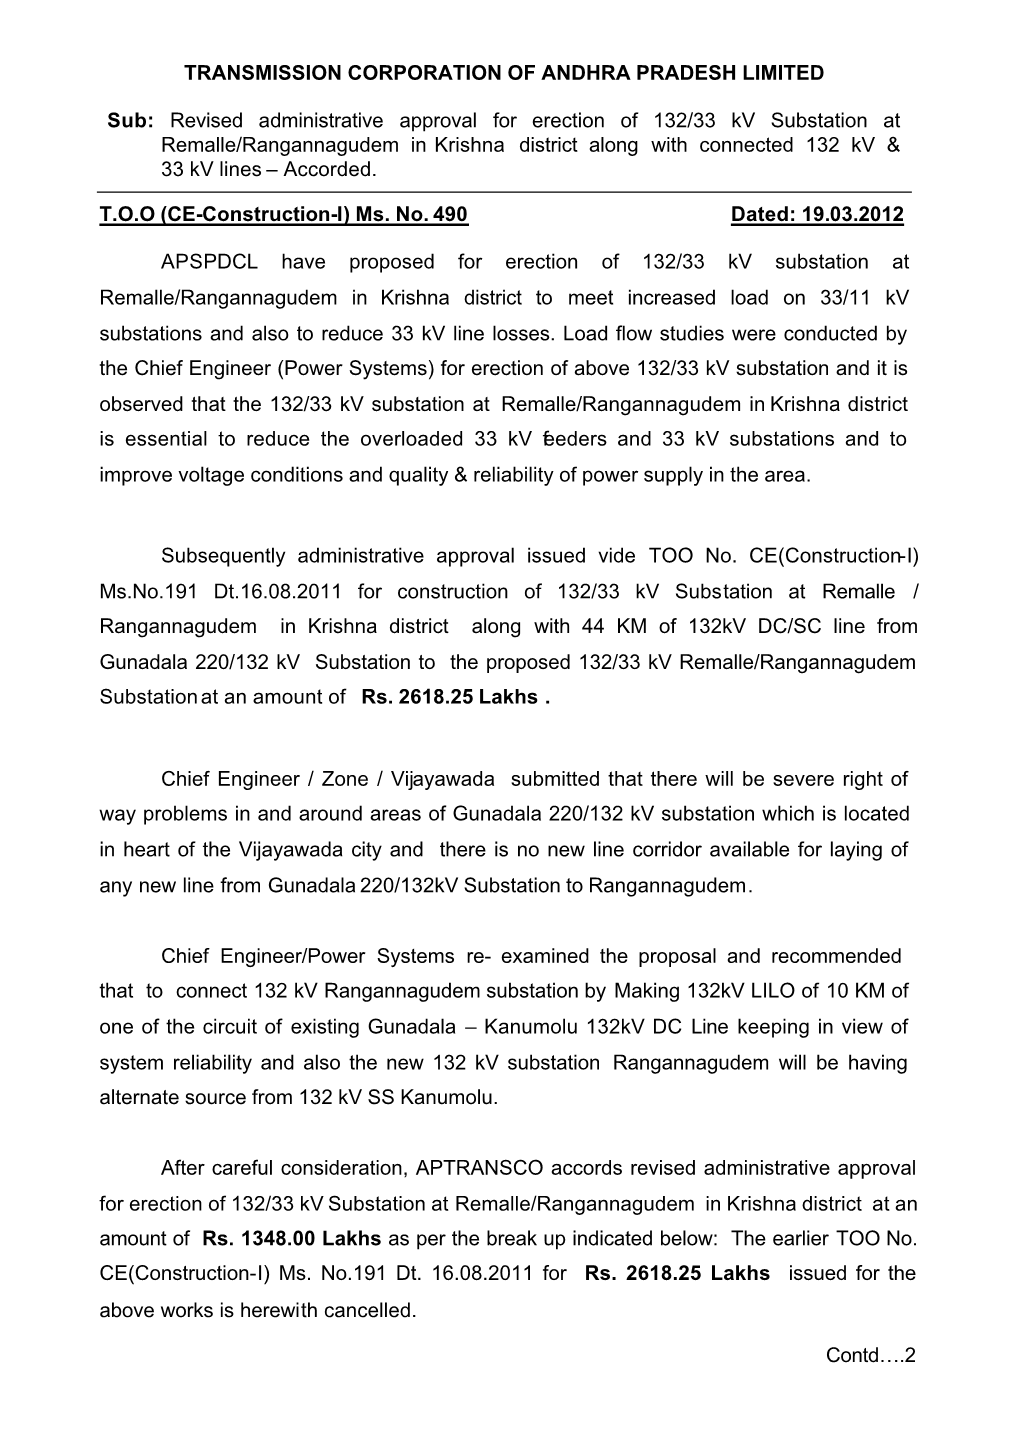 Revised Administrative Approval for Erection of 132/33 Kv Substation at Remalle/Rangannagudem in Krishna District Along with Connected 132 Kv & 33 Kv Lines – Accorded